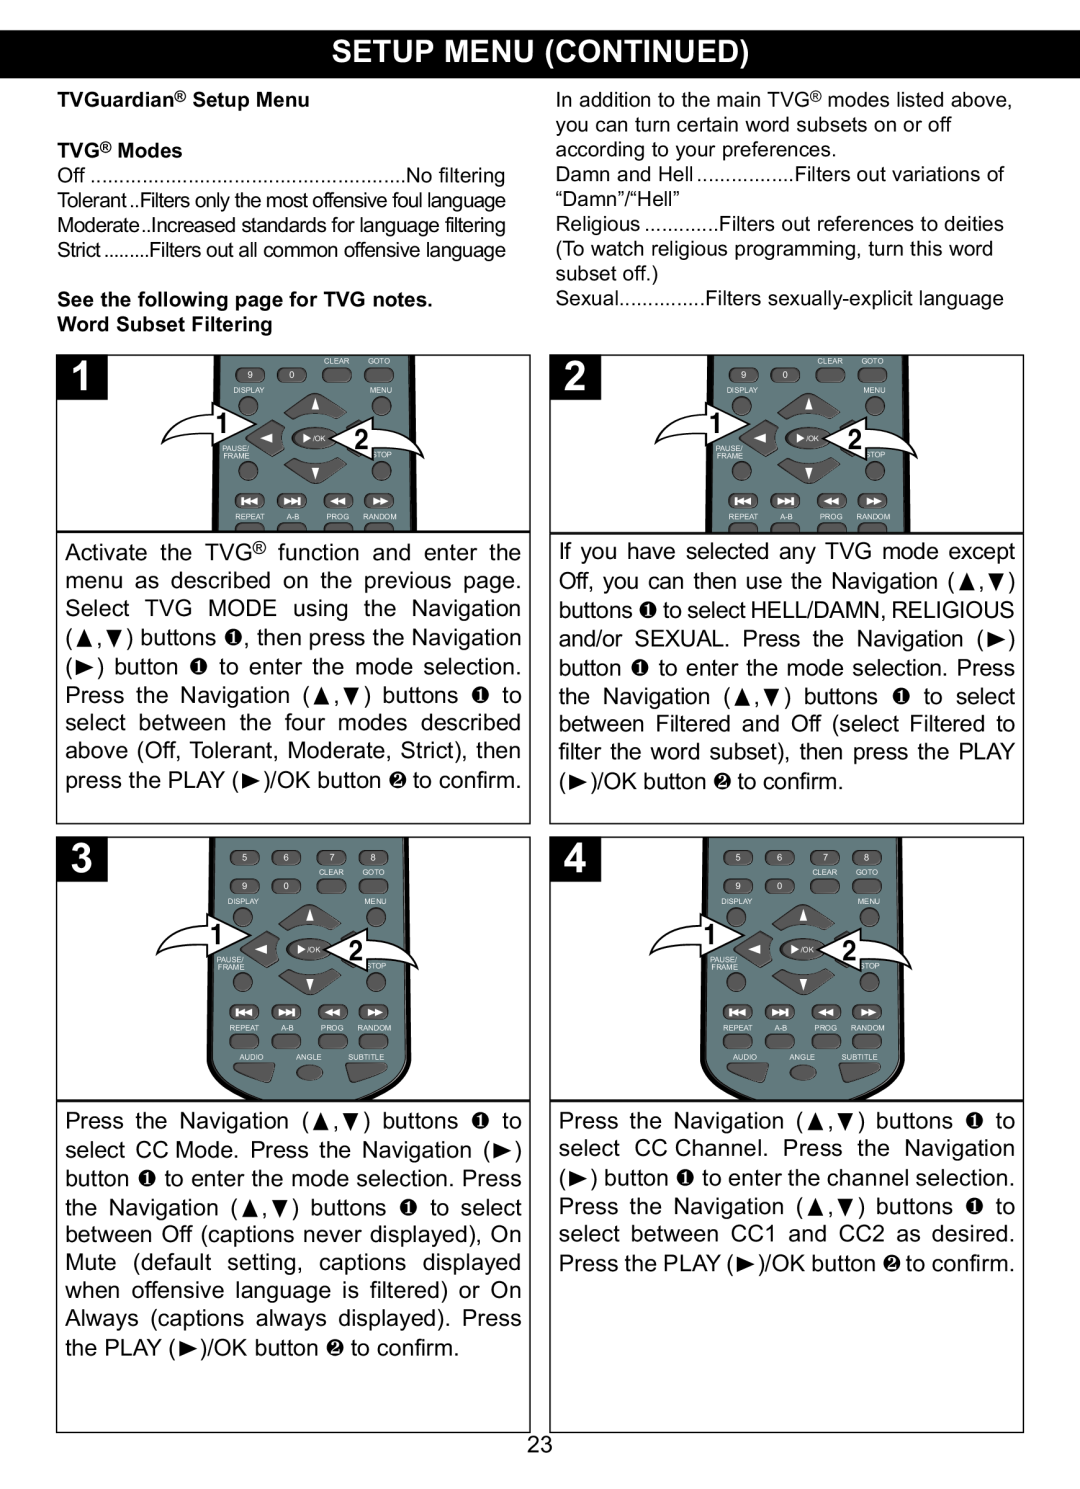 Memorex MVDP1088 manual Setup Menu Continued, TVG Modes, See the following page for TVG notes 